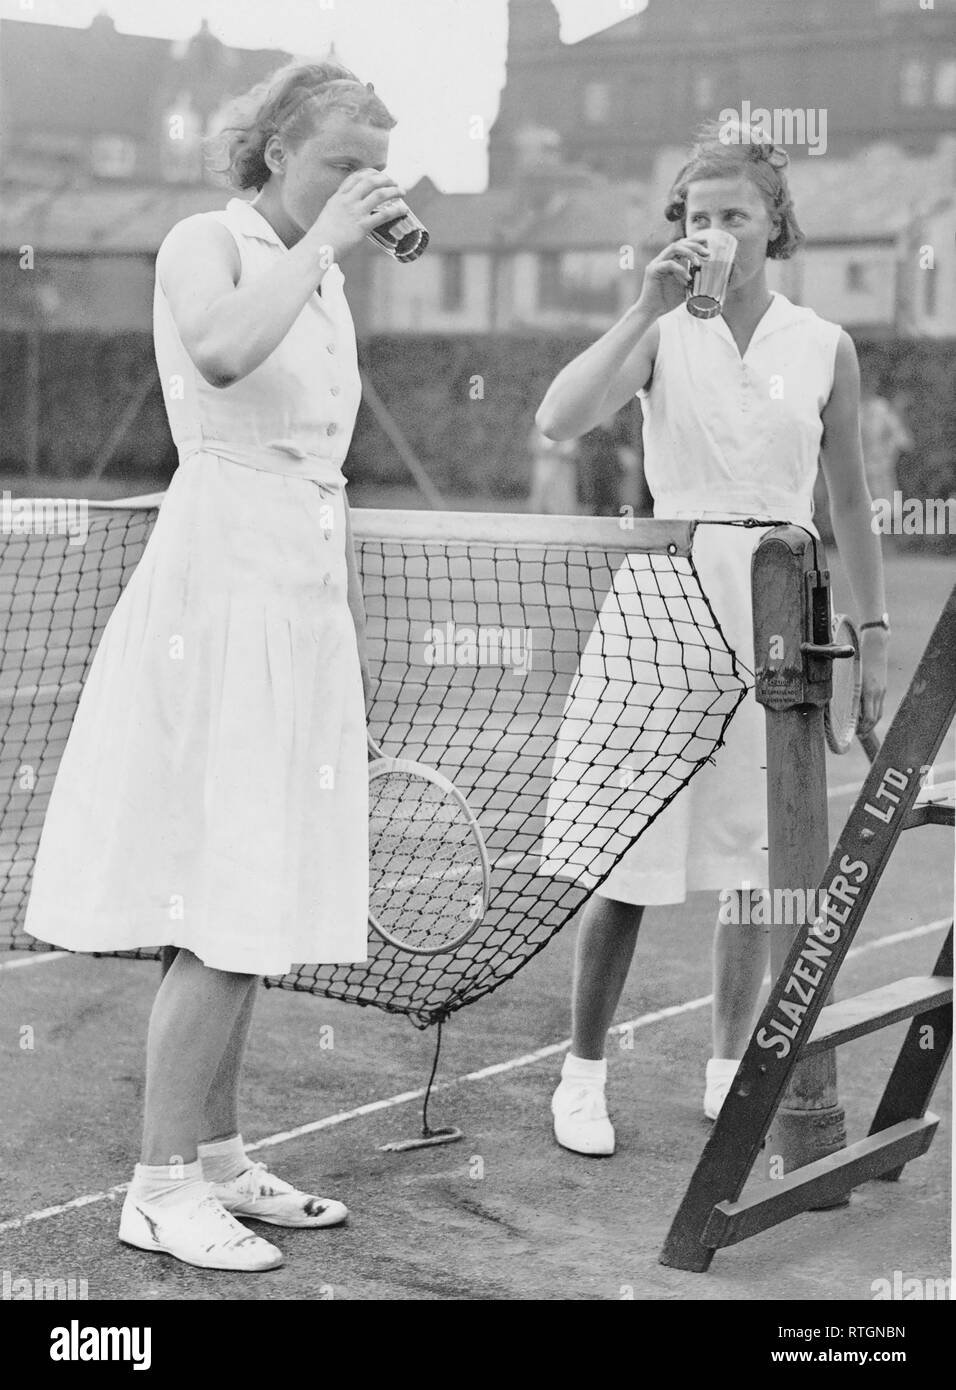 Photo Must Be Credited ©Alpha Press 050000 02/08/1934 Miss D Rowe (Eversley) and Miss M Gardiner (St. Paul's Girls School) after going to 17 deuces in the second set in their Singles march, ordered two orange-ales which they promptly drank. Miss Rowe eventually won 6-3, 4-6, 6-2. The Schoolgirls Lawn Tennis Championships at Queen's Club in West Kensington, London. Stock Photo